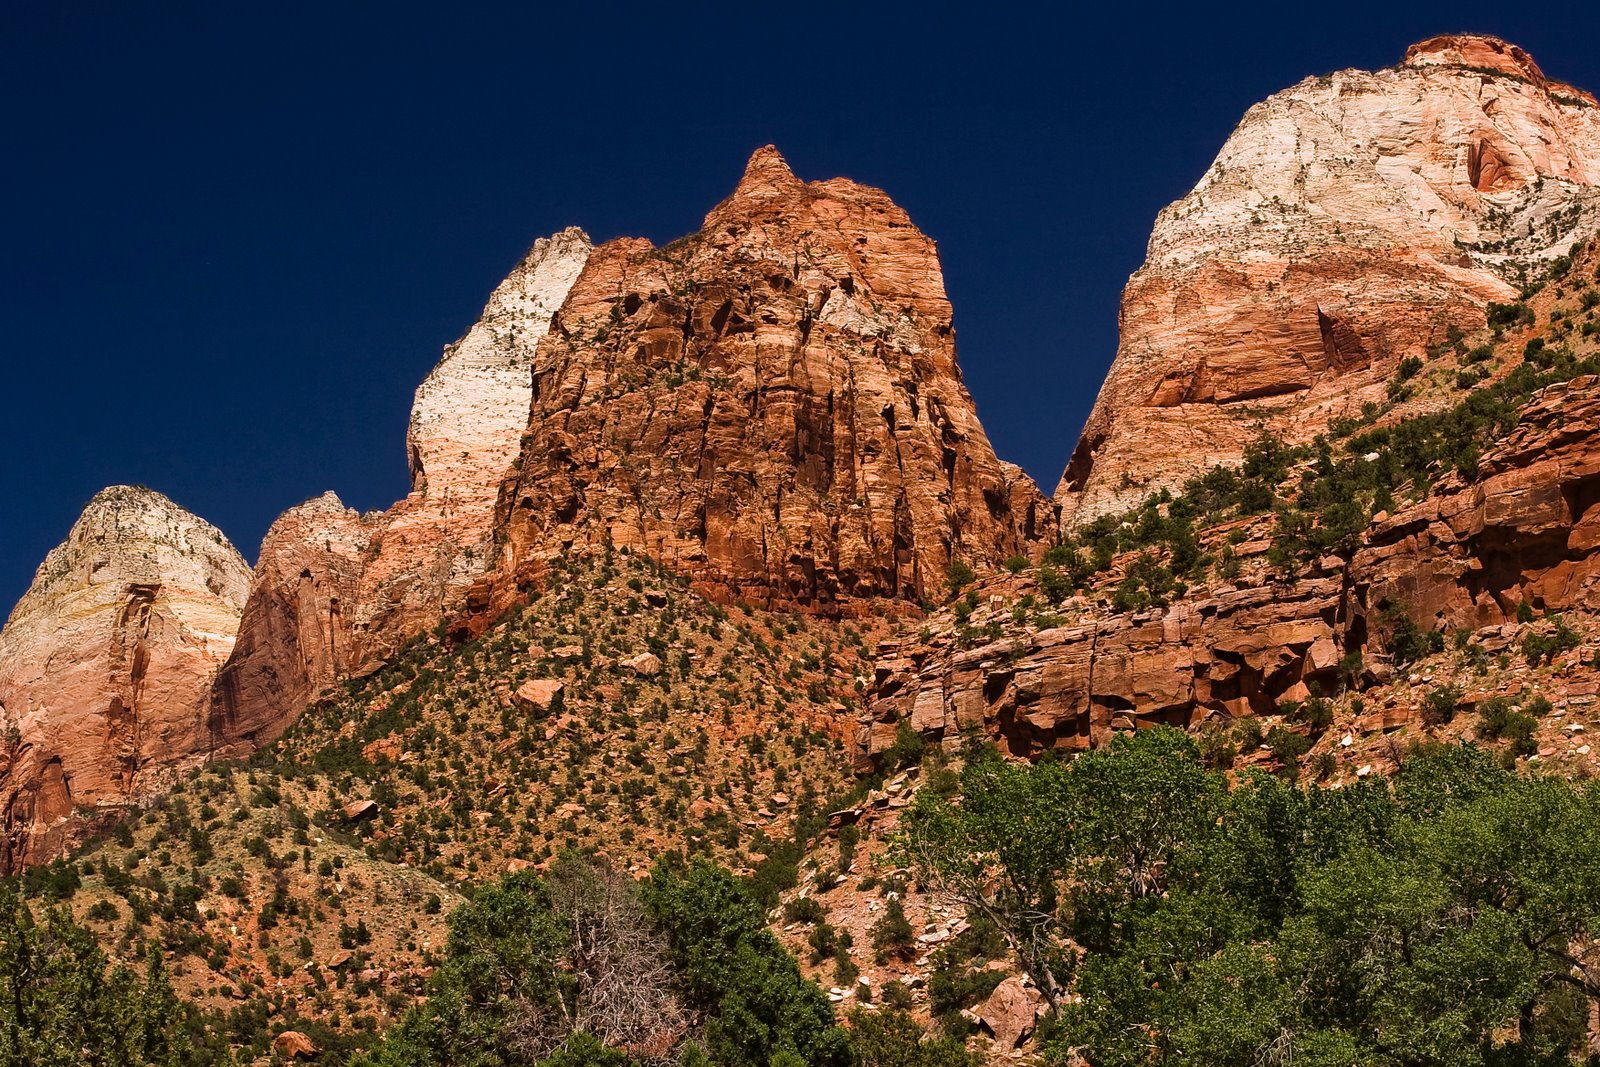 365 Days in Zion: Day 285: July 7, 2005 - Main Canyon View